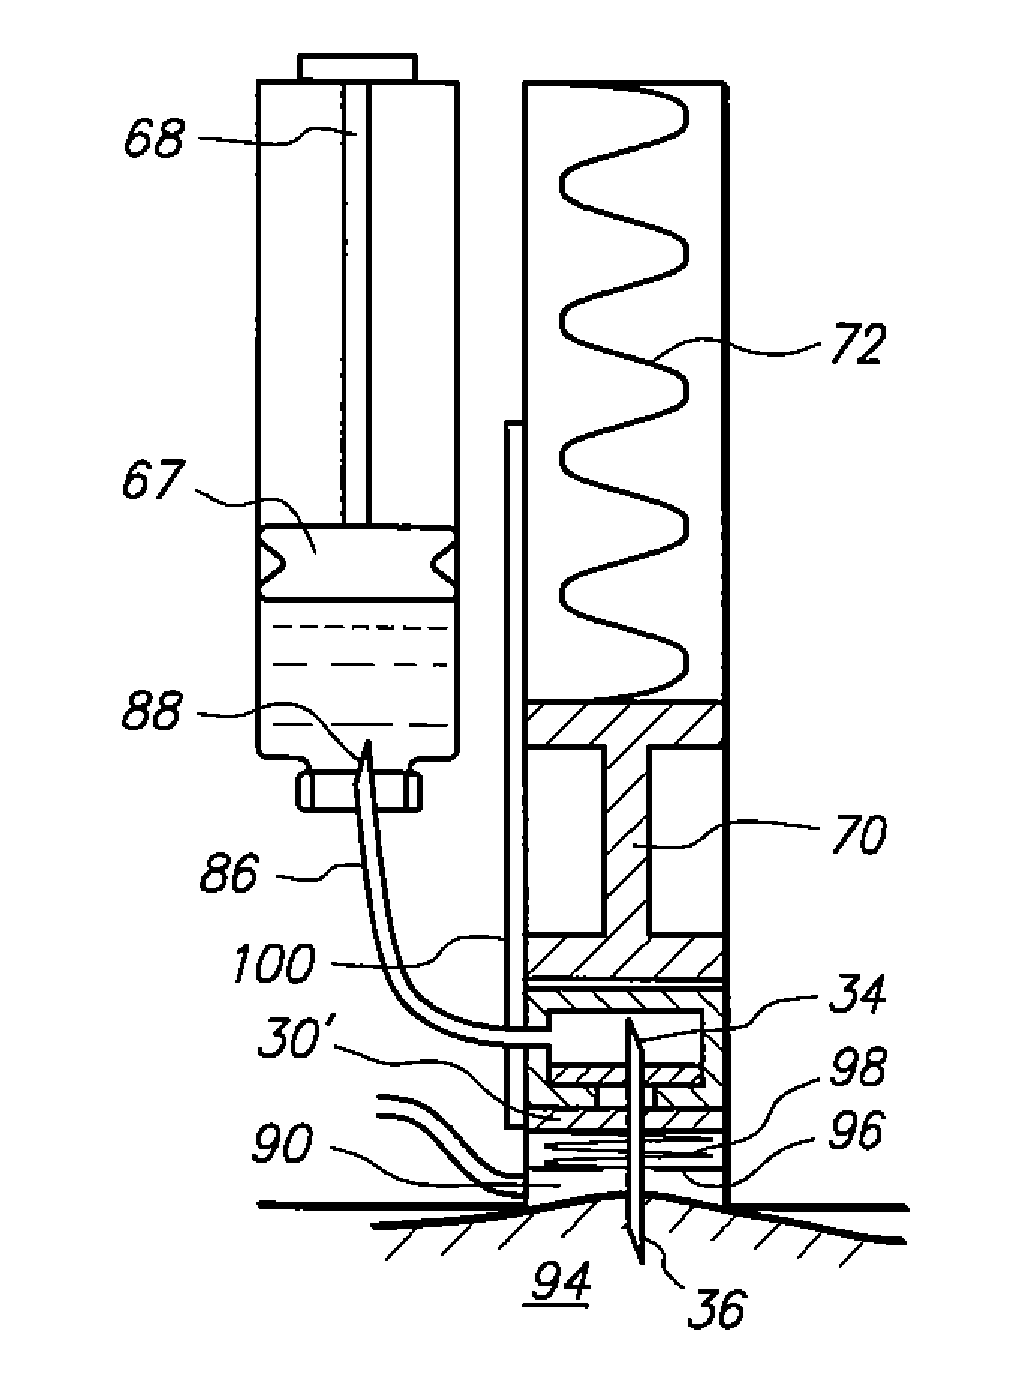 Injection System With Hidden Needles